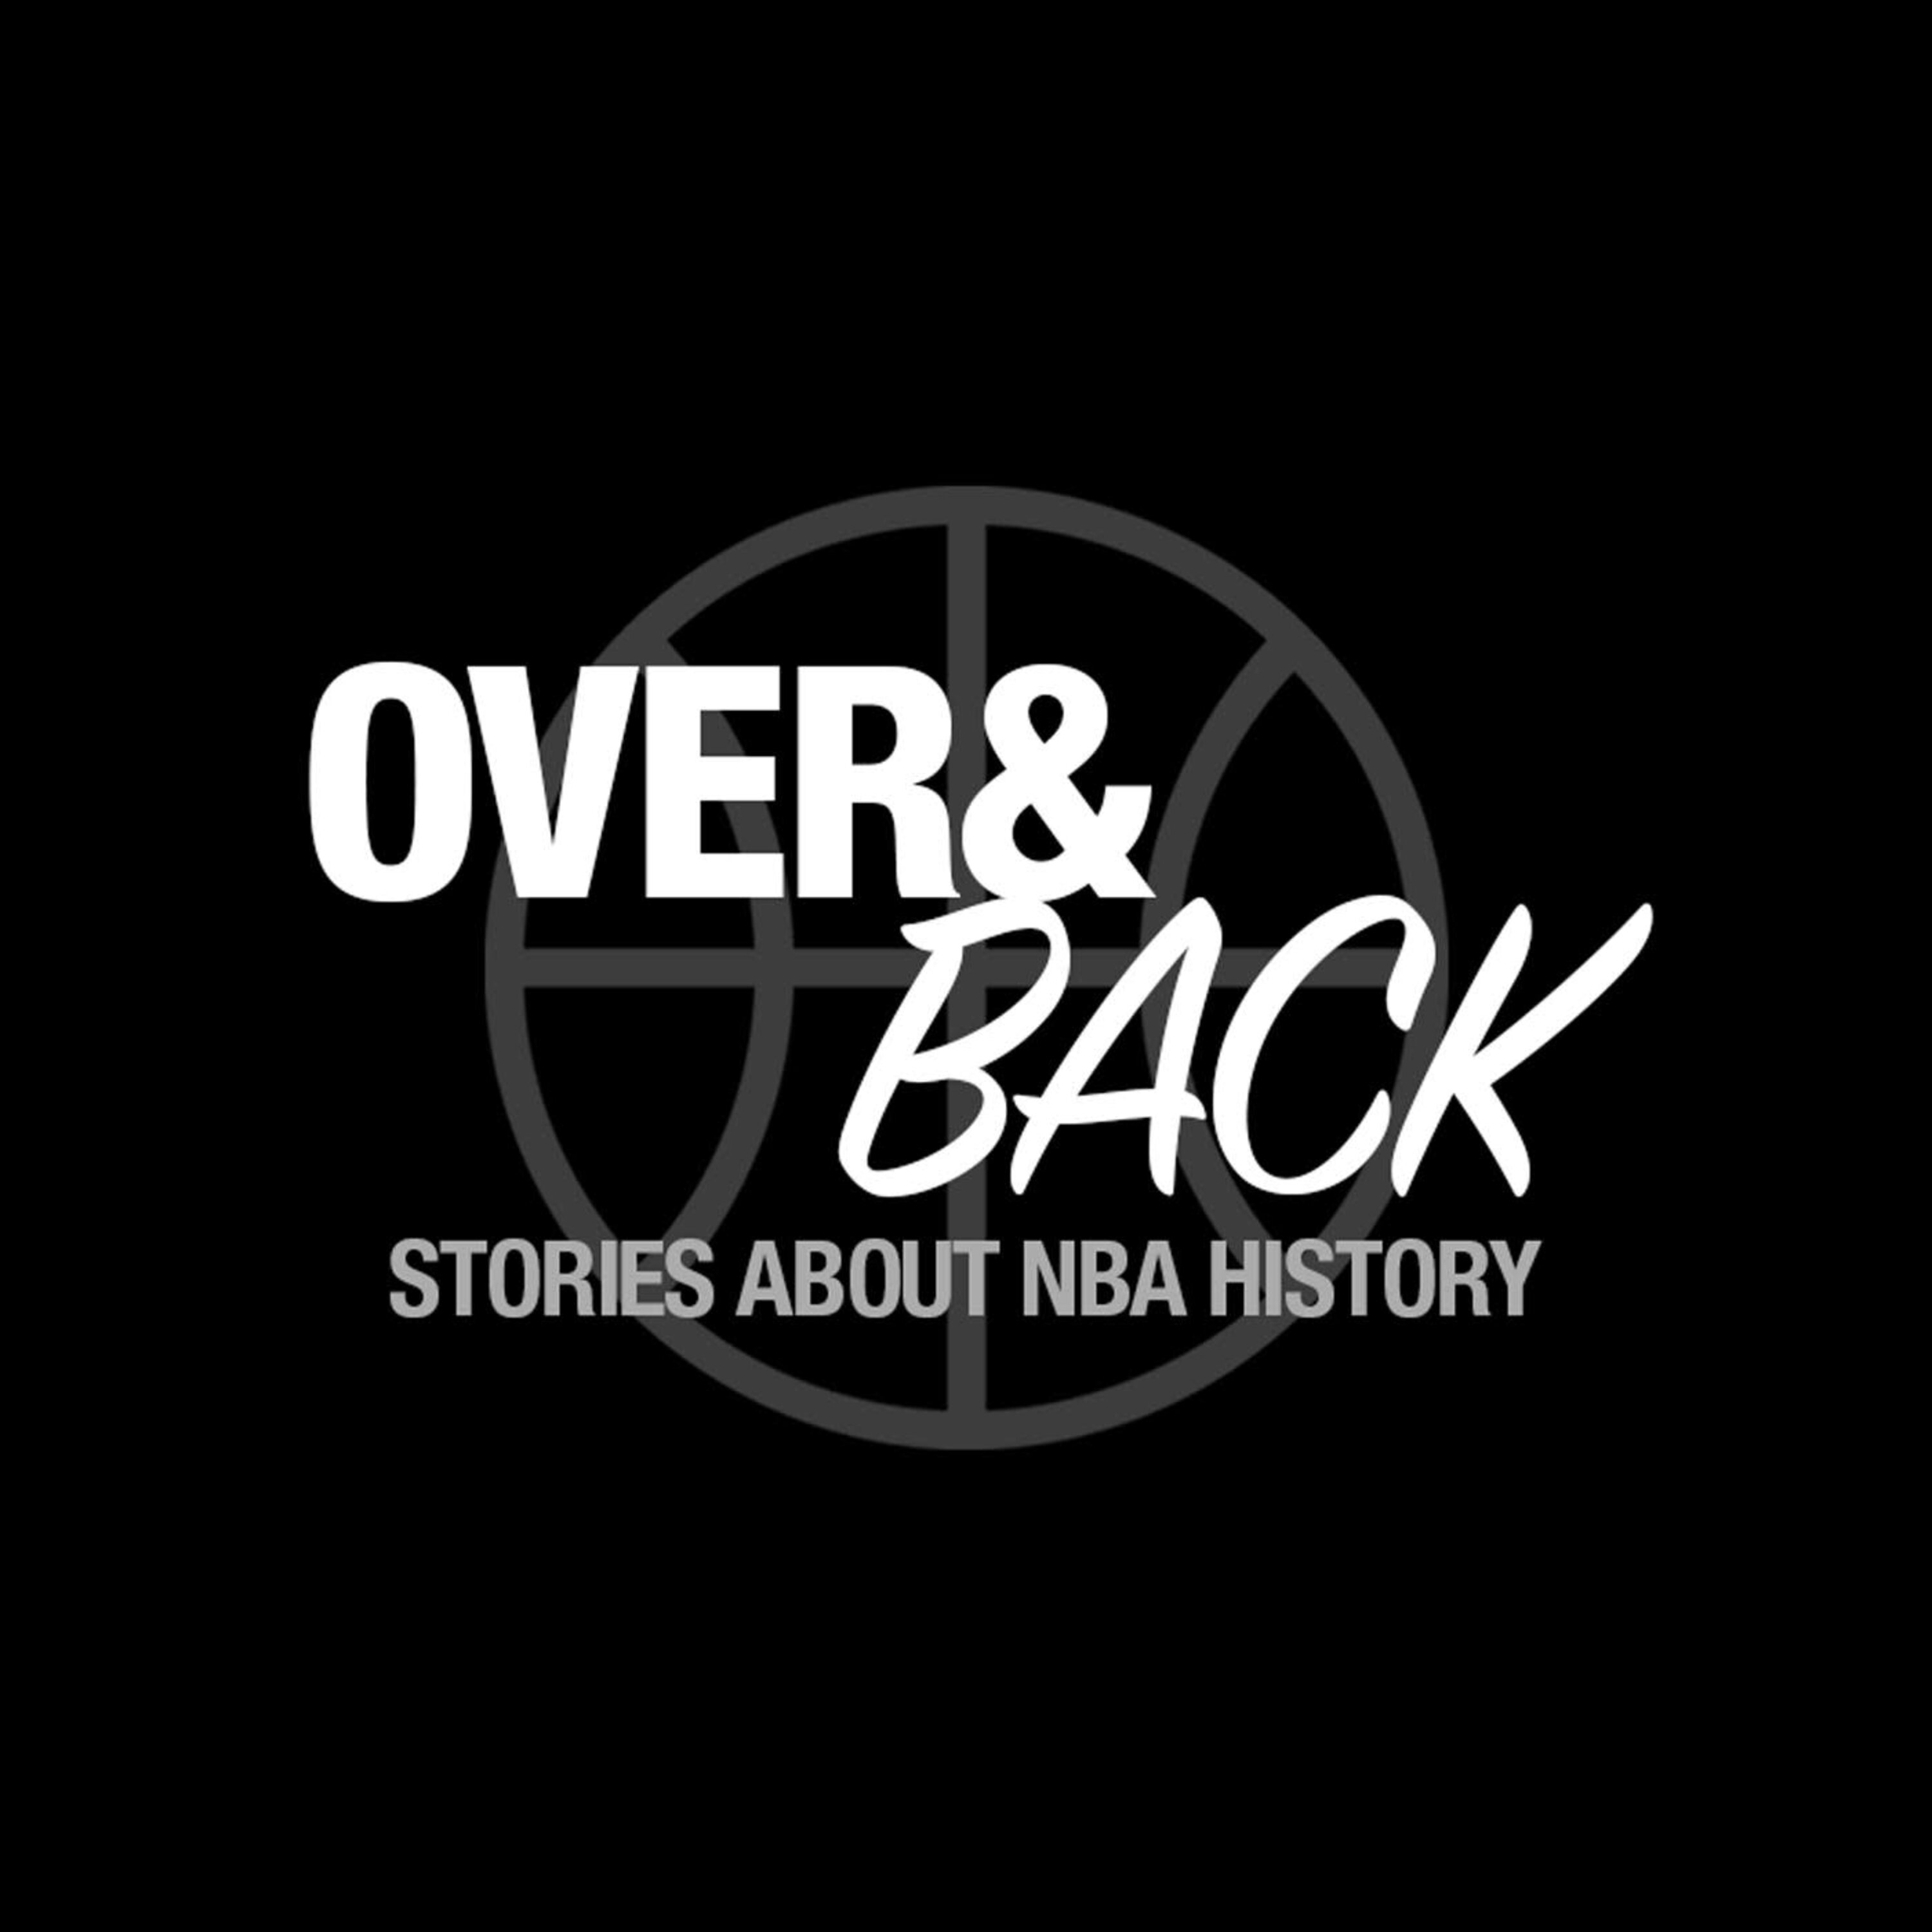 This episode is the worst: History of NBA tanking